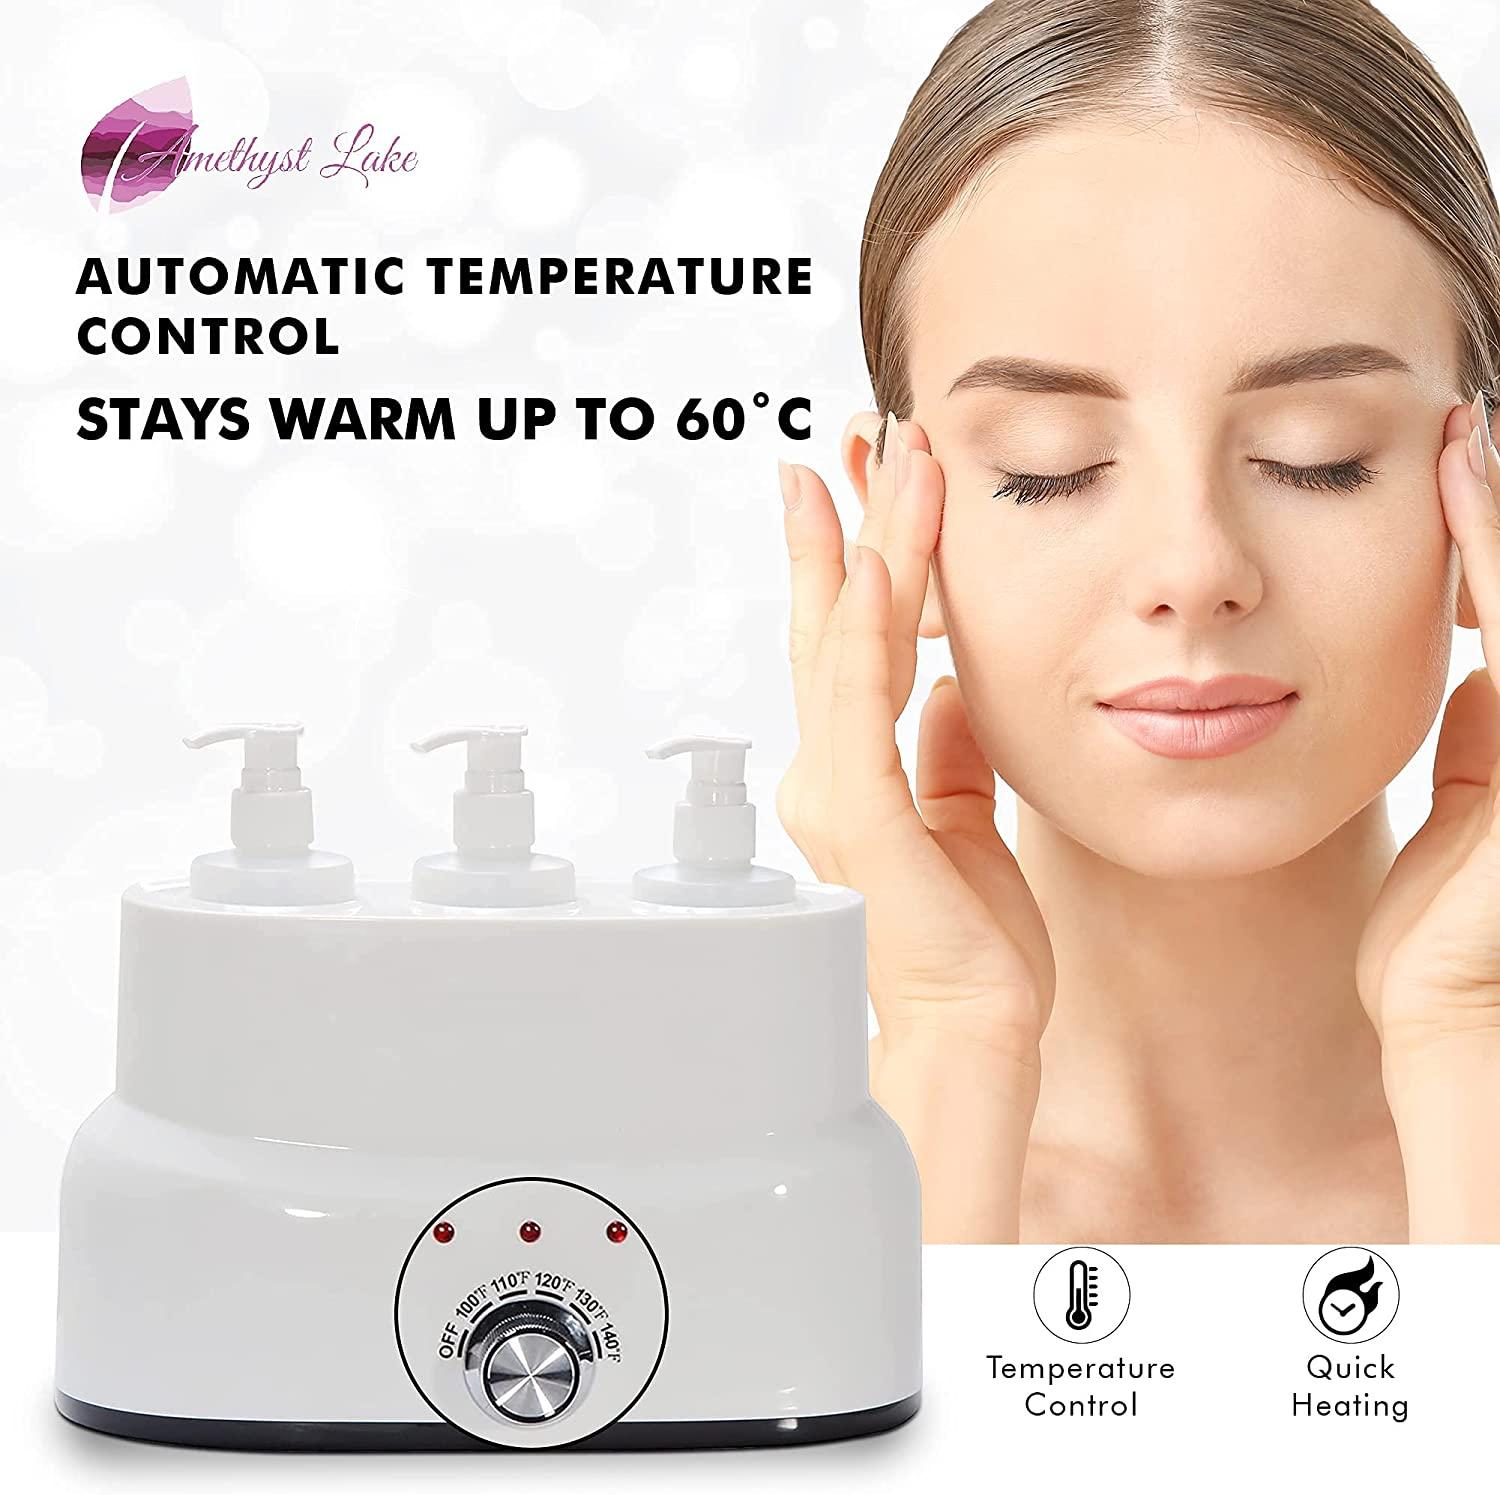 Massage Oil Warmer for Professional Salon Spa Home Lotion Heater